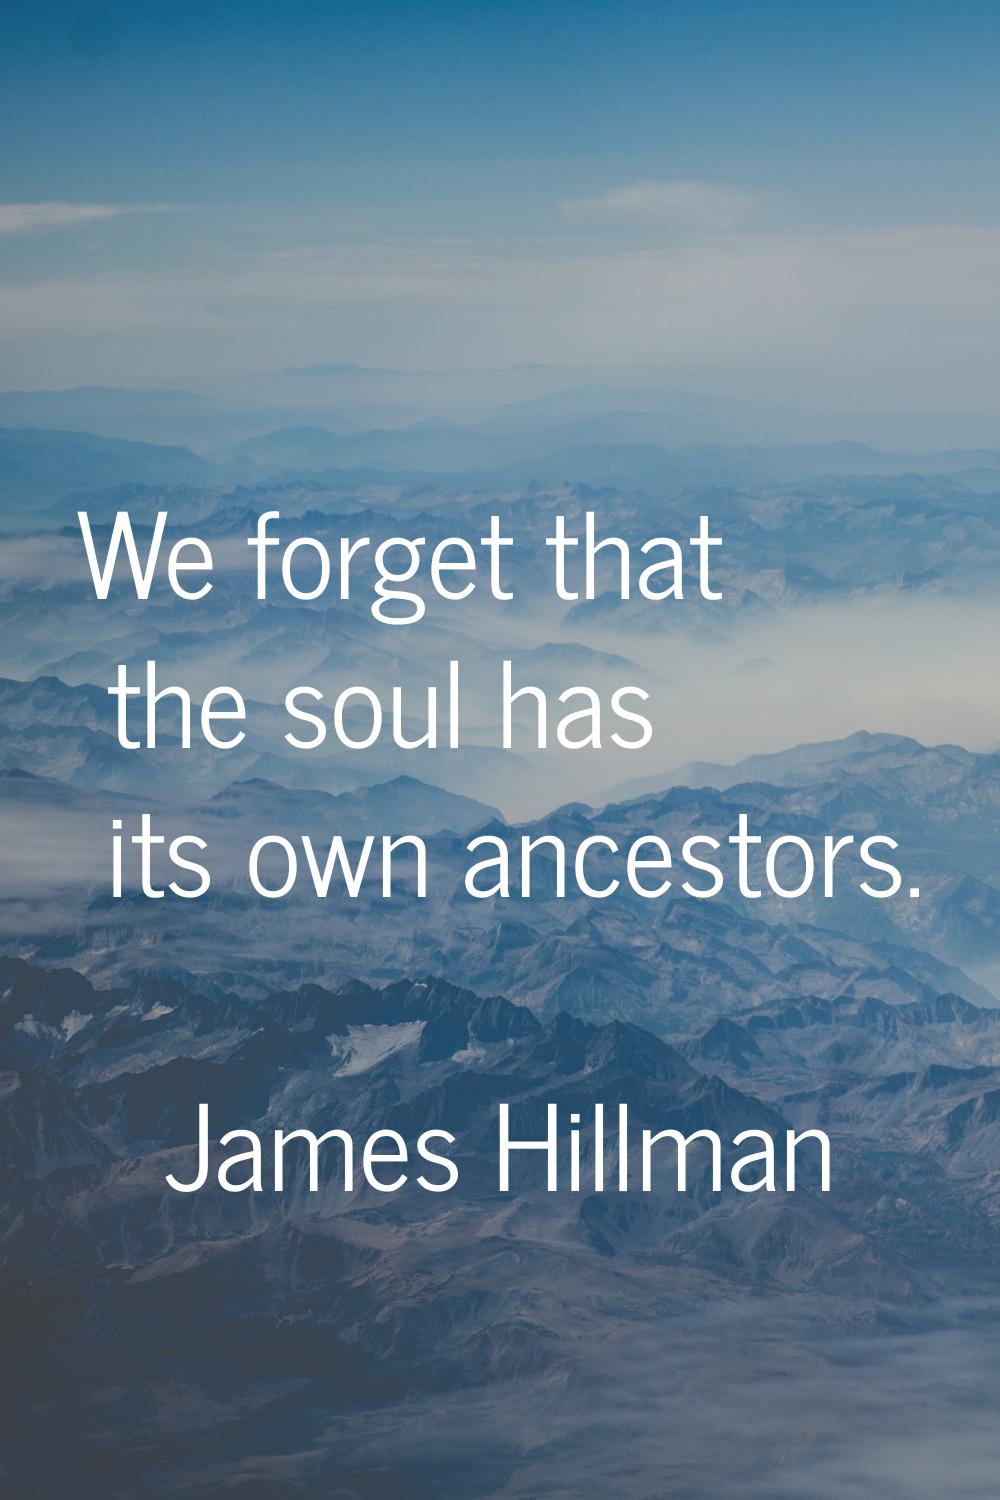 We forget that the soul has its own ancestors.